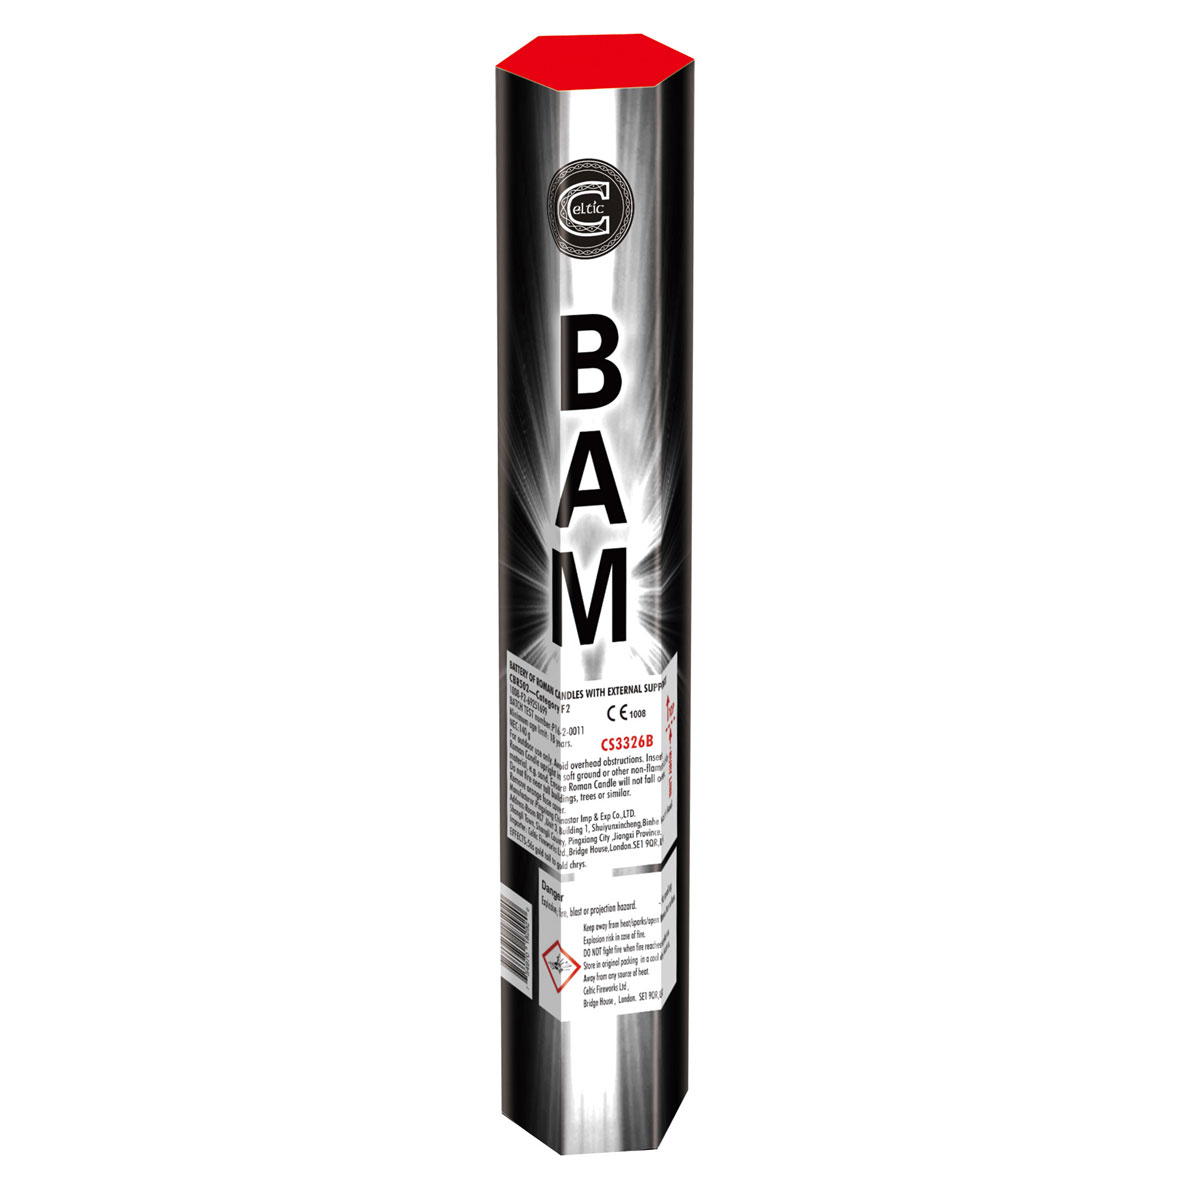 BAM roman candle firework by celtic fireworks